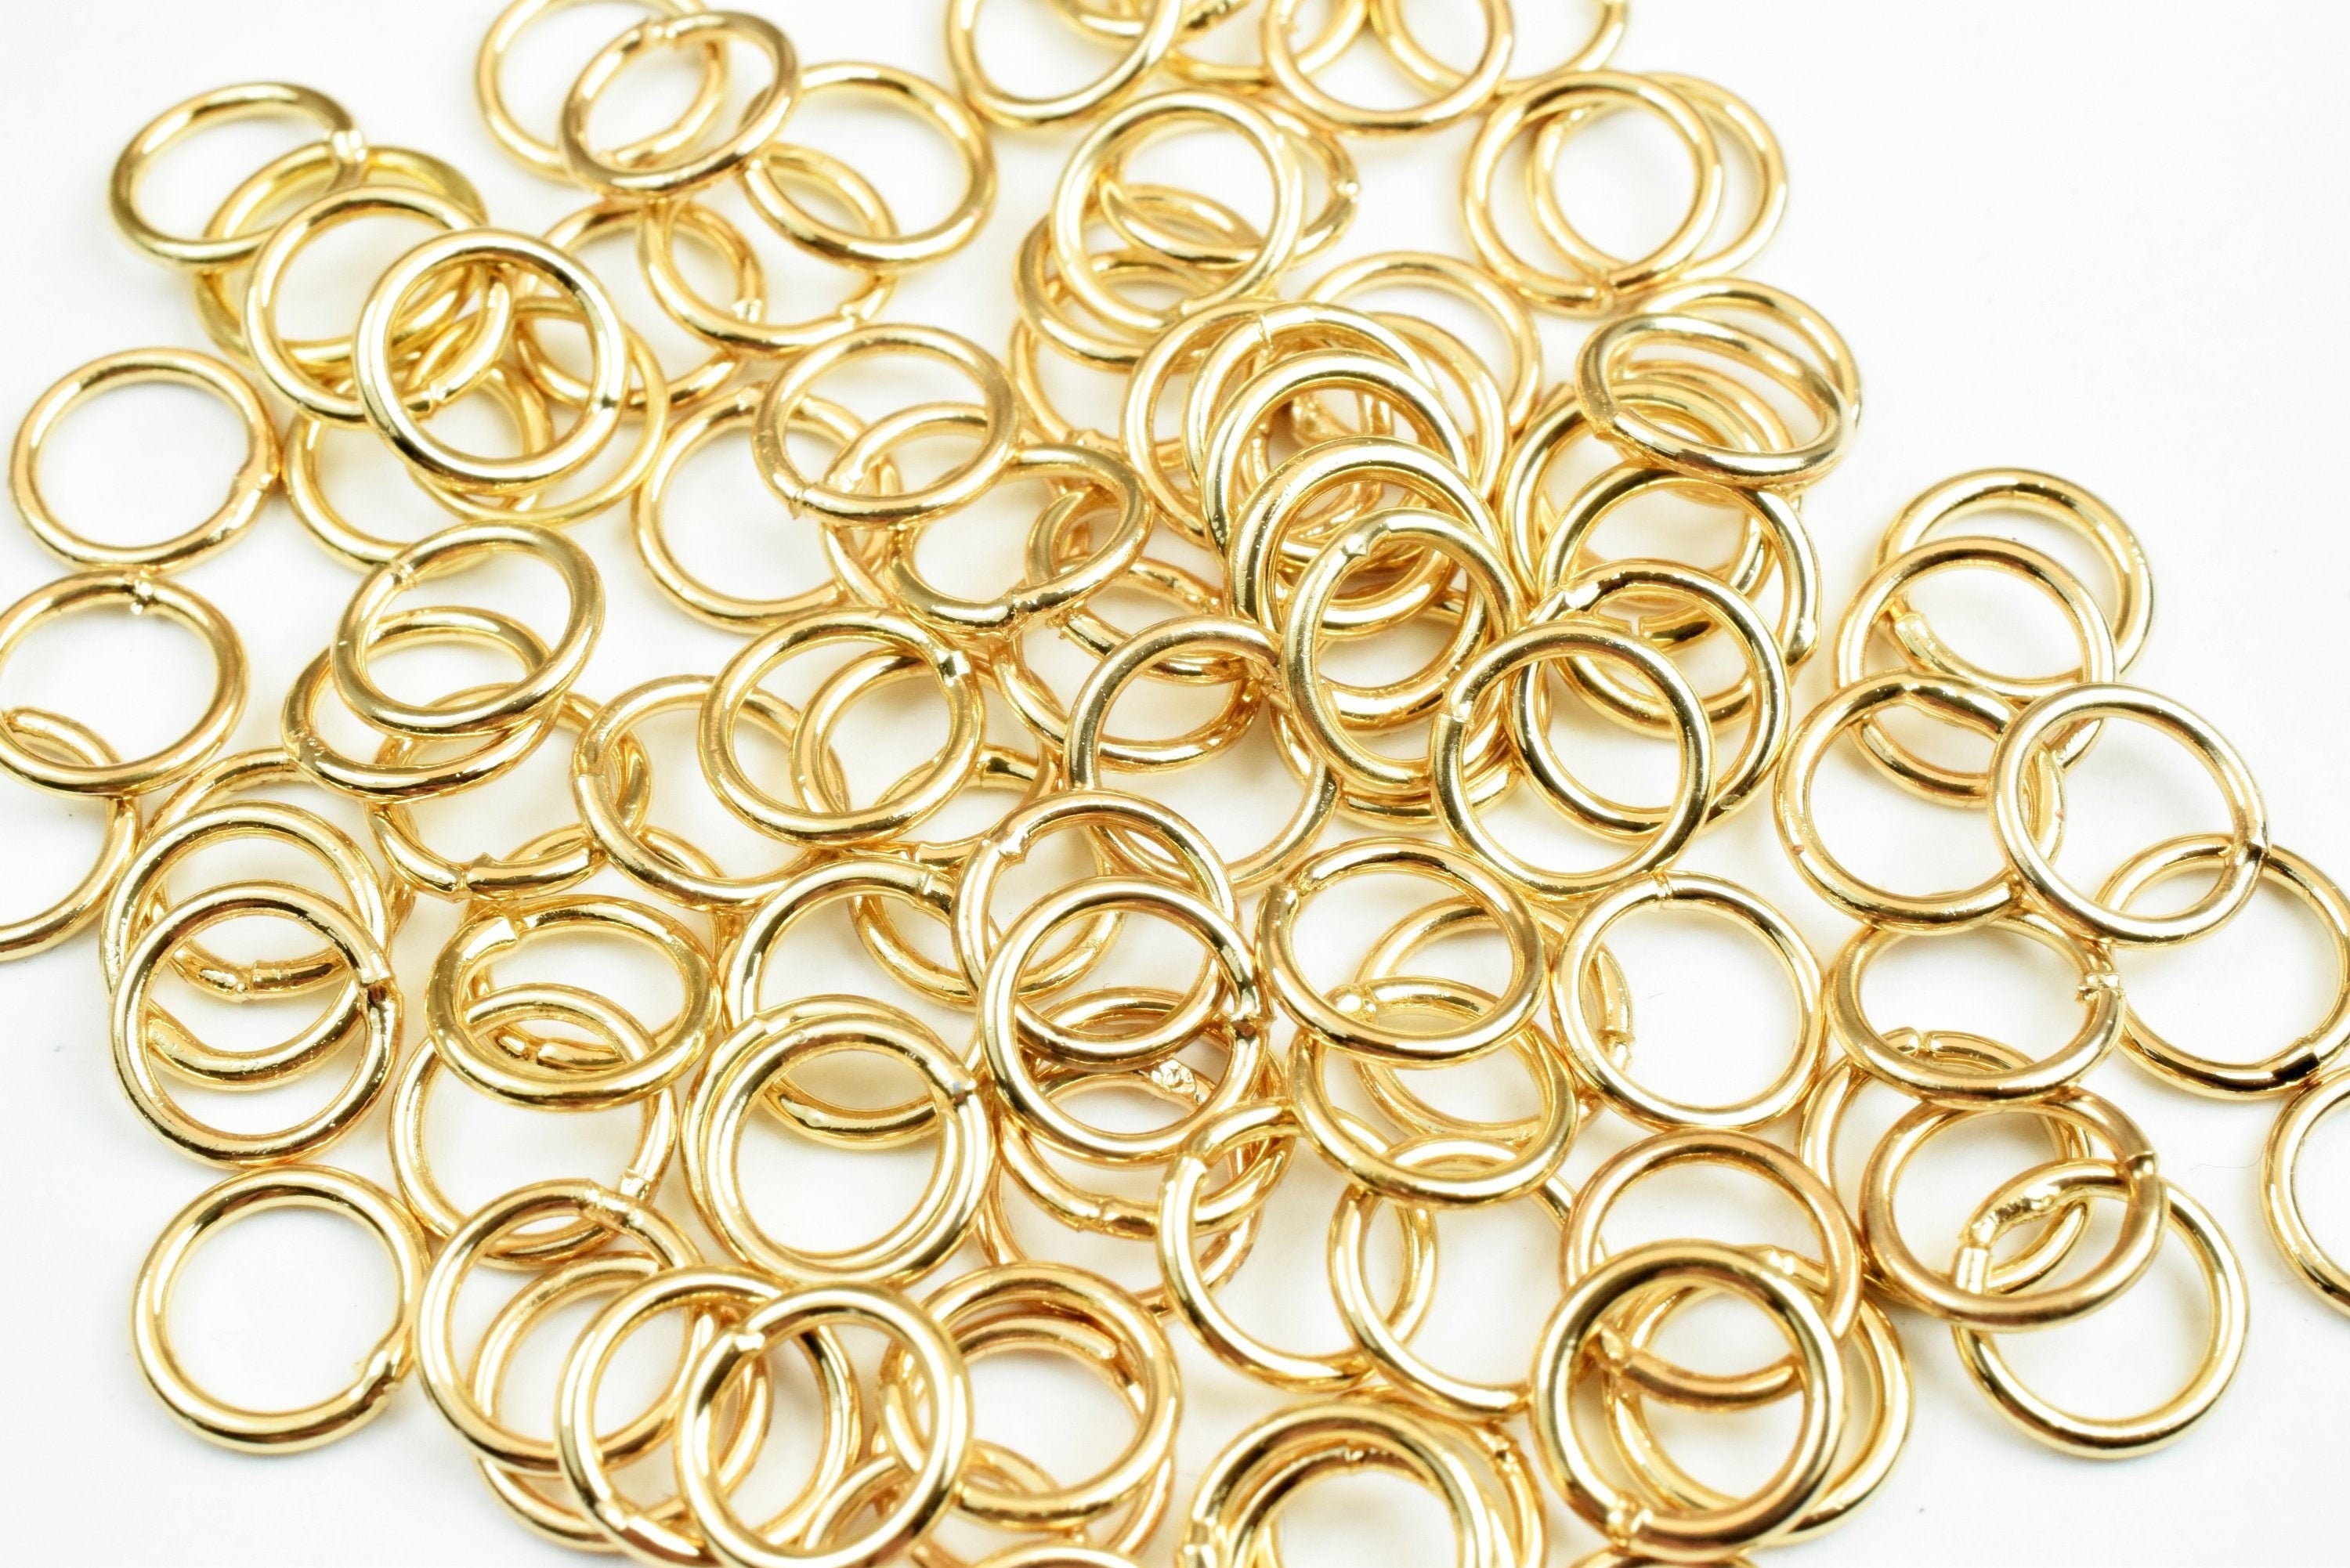 ArtCentury 18K 2MM Gold Jump Rings Open Jump Rings 100PCS 2MM Jump Rings  for Jewelry Making Jump Rings 2MM 18k Gold Plated Jump Rings for Jewelry